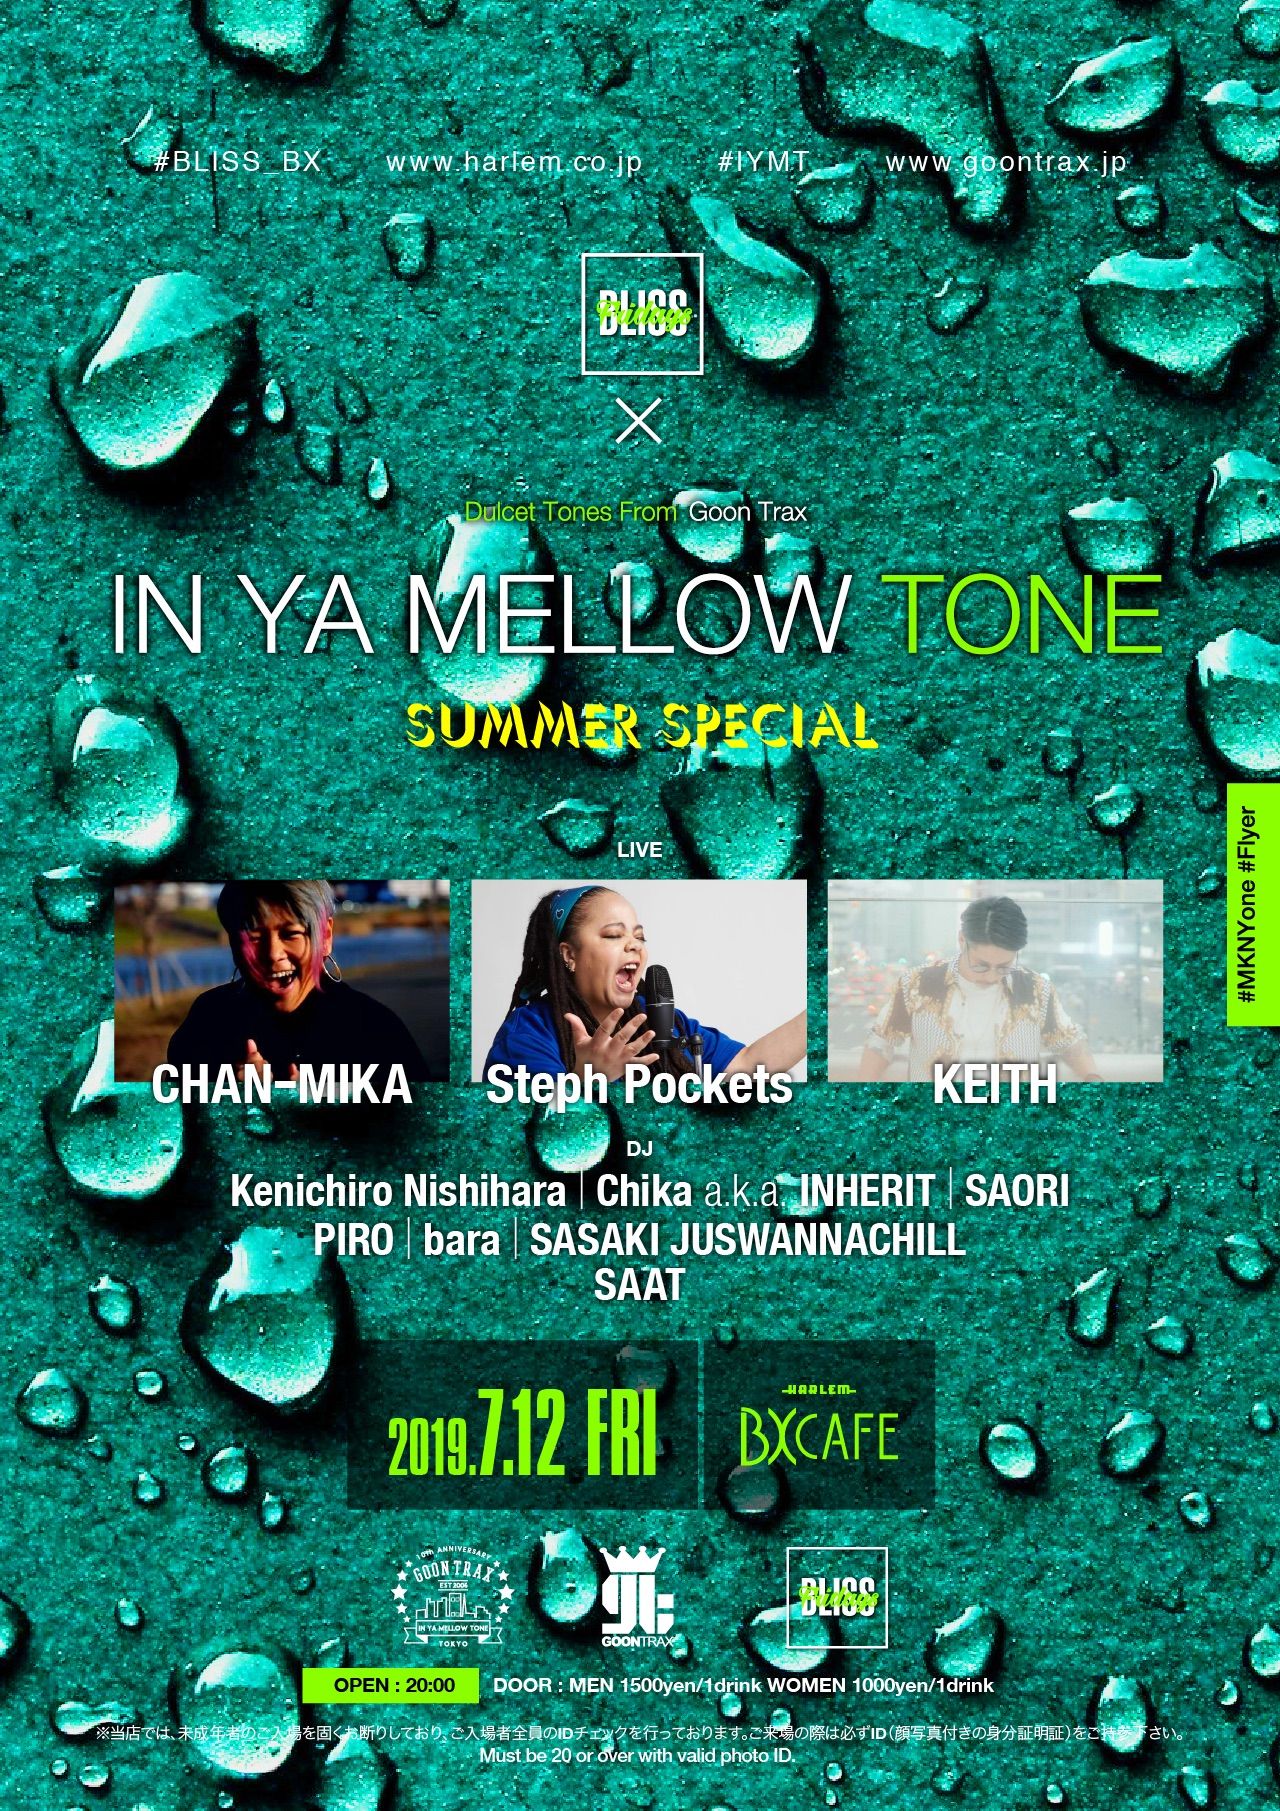 AFTER WORK EACH & EVERY FRIDAYS BLISS FRIDAYS × IN YA MELLOW TONE SUMMER SPECIAL